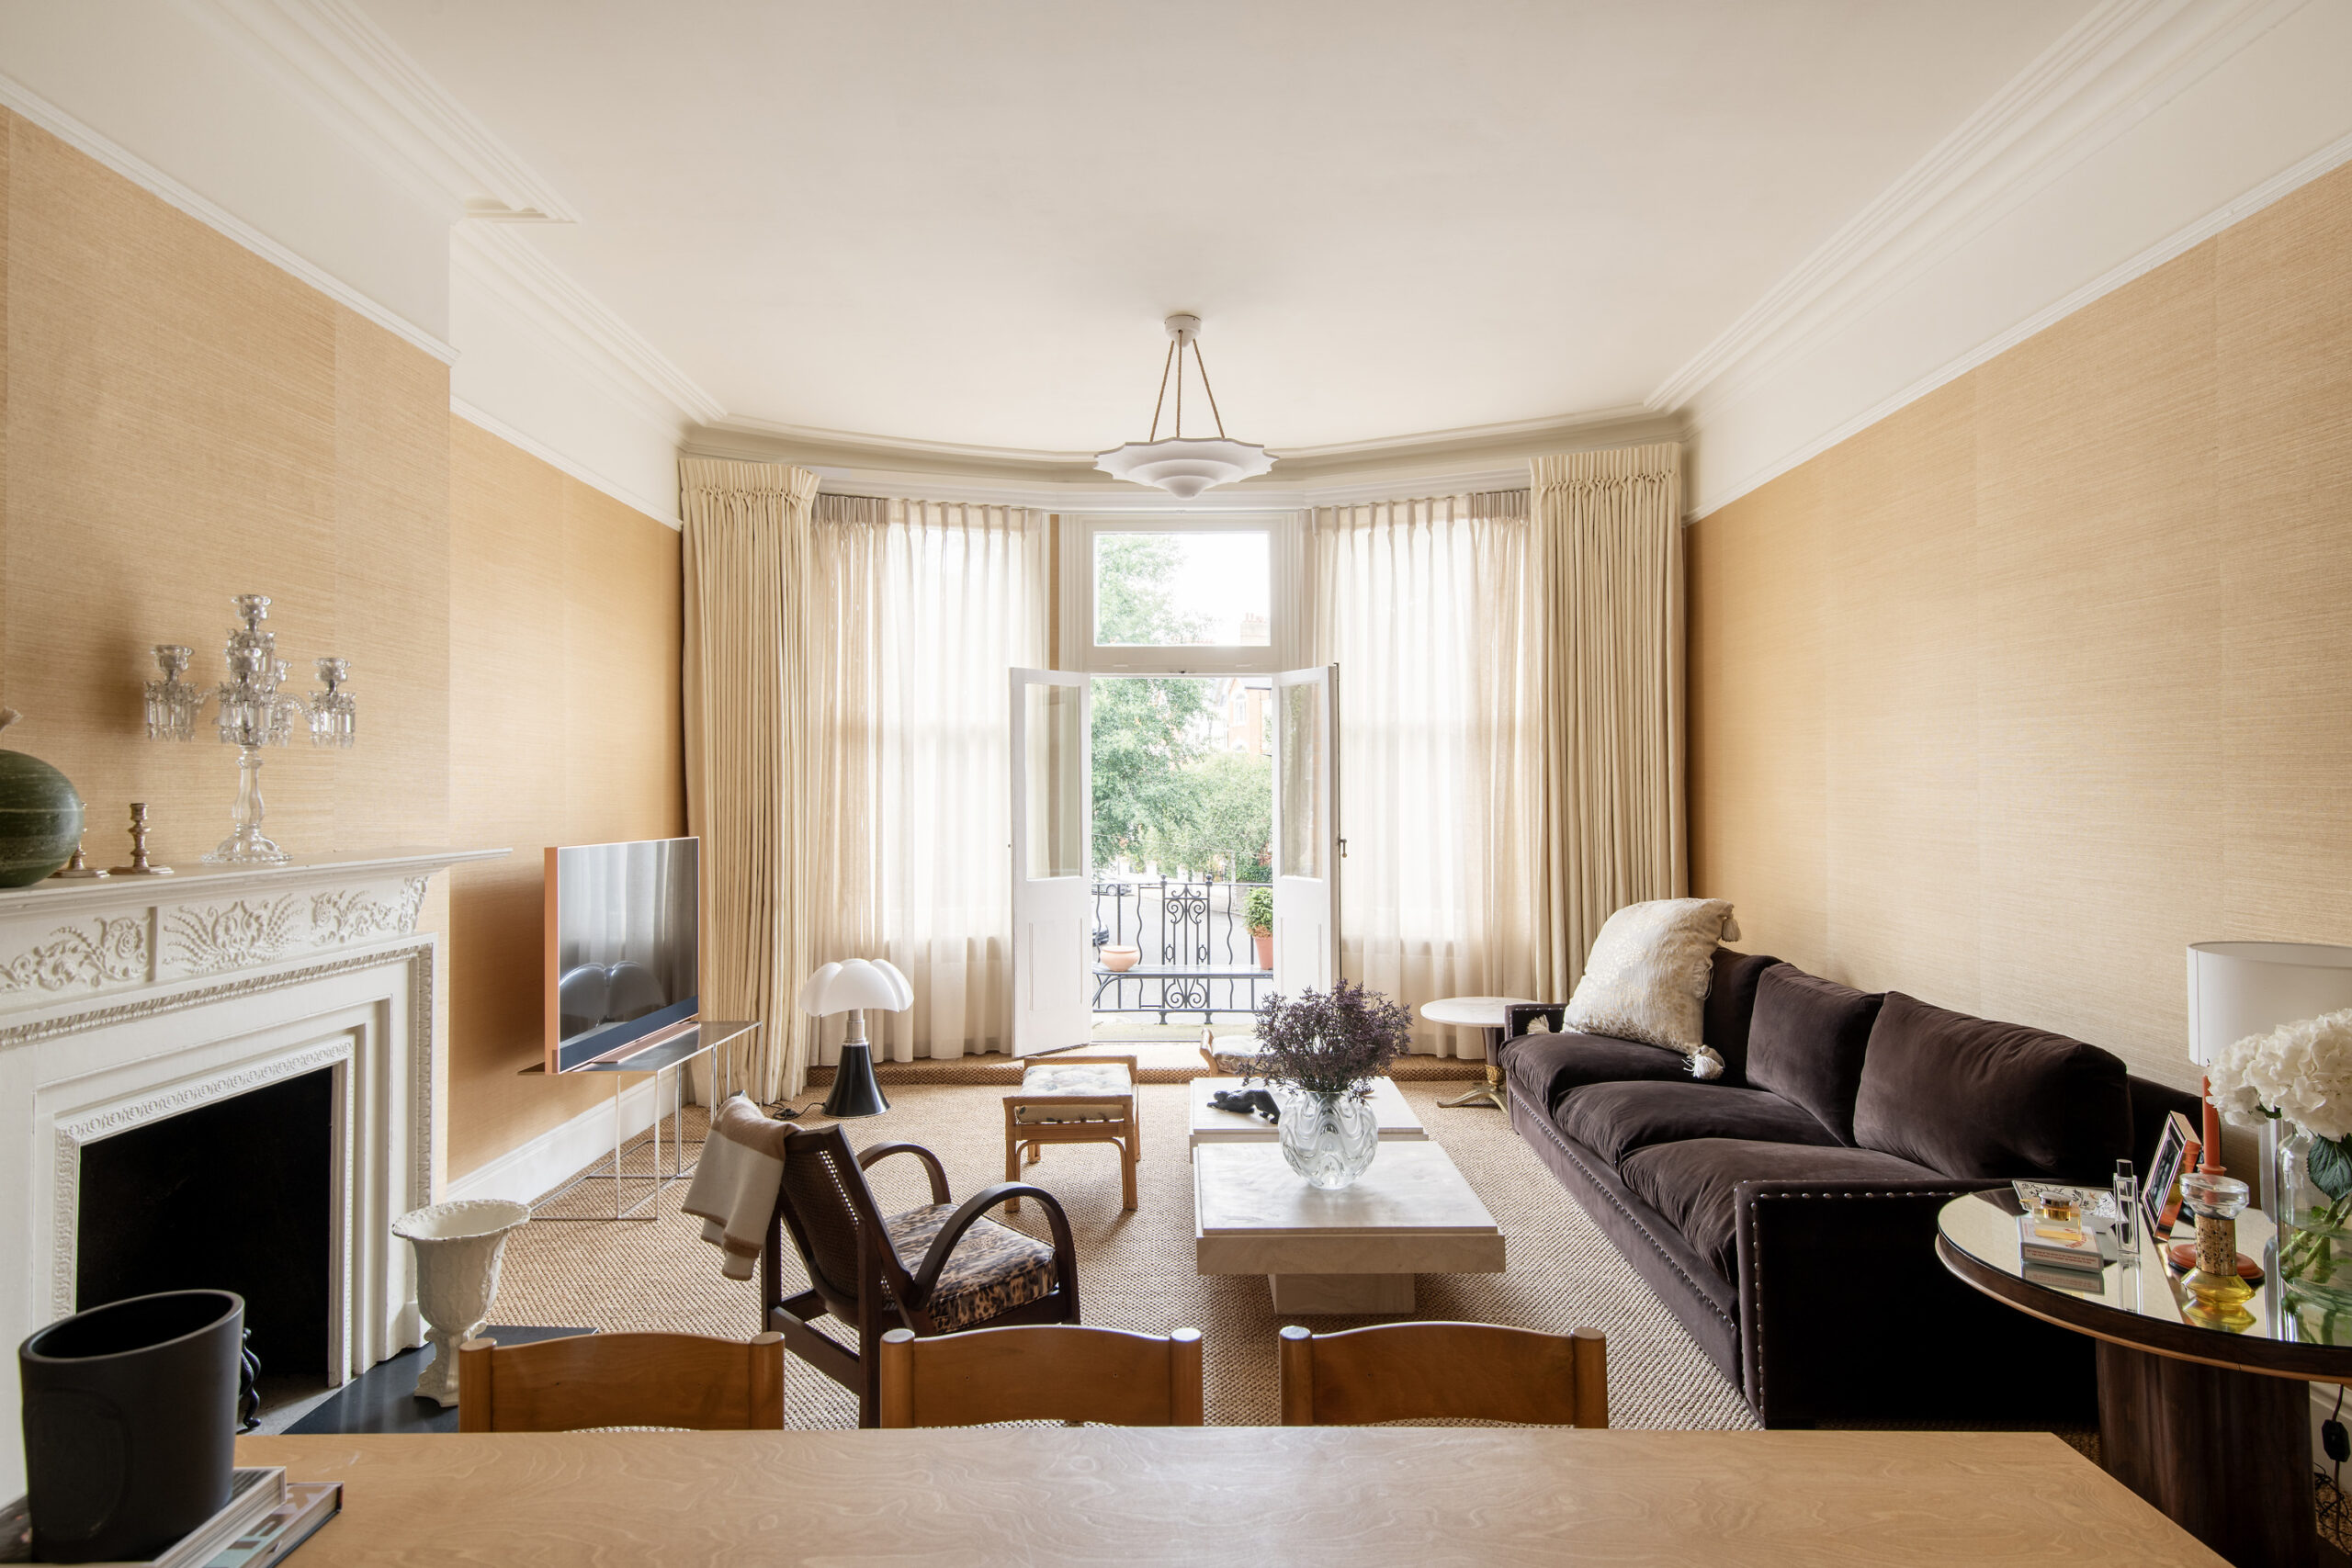 Luxury living room of an apartment for sale in Maida Vale